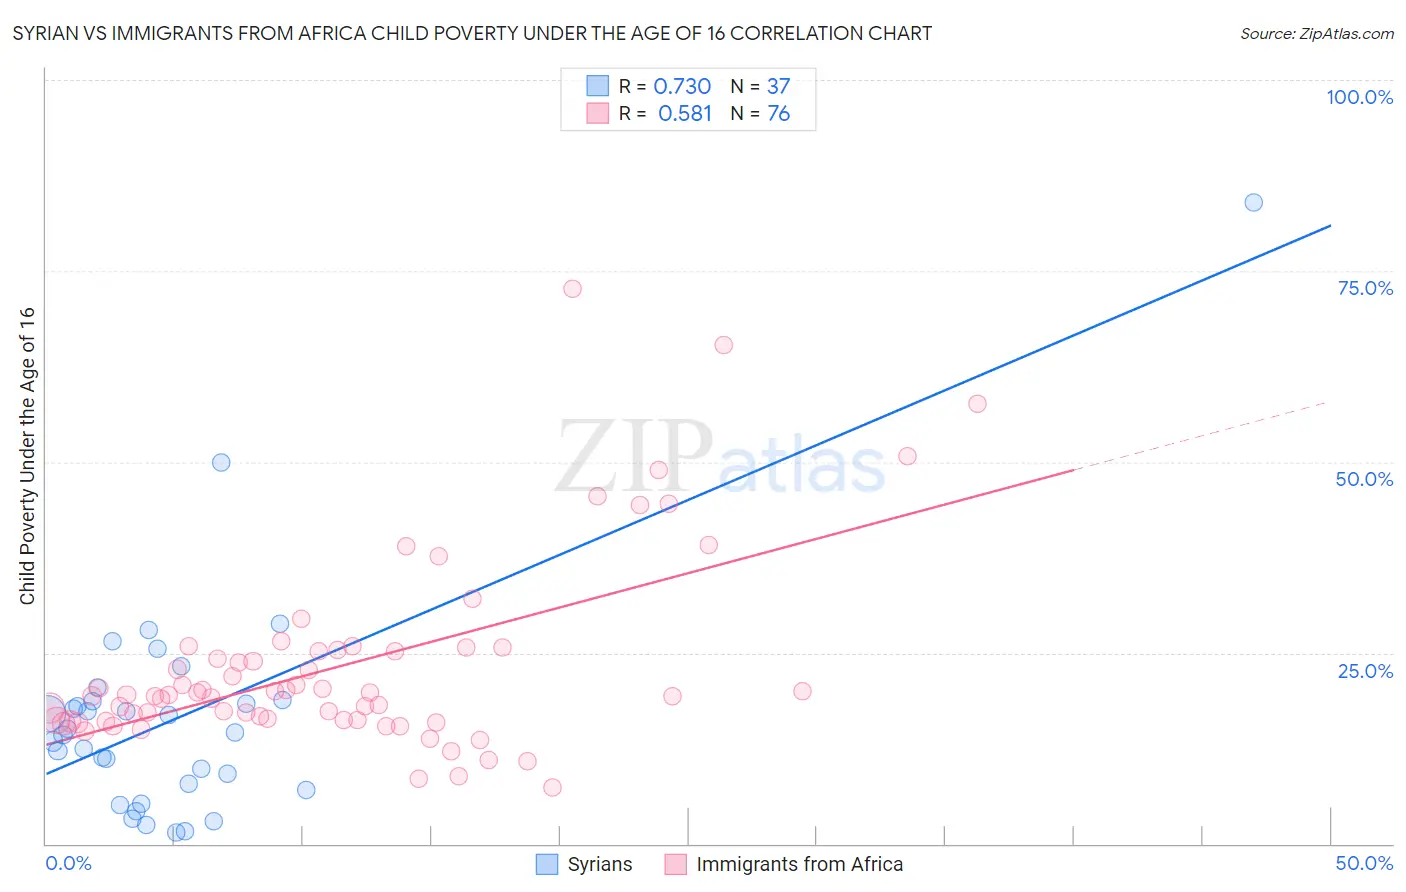 Syrian vs Immigrants from Africa Child Poverty Under the Age of 16